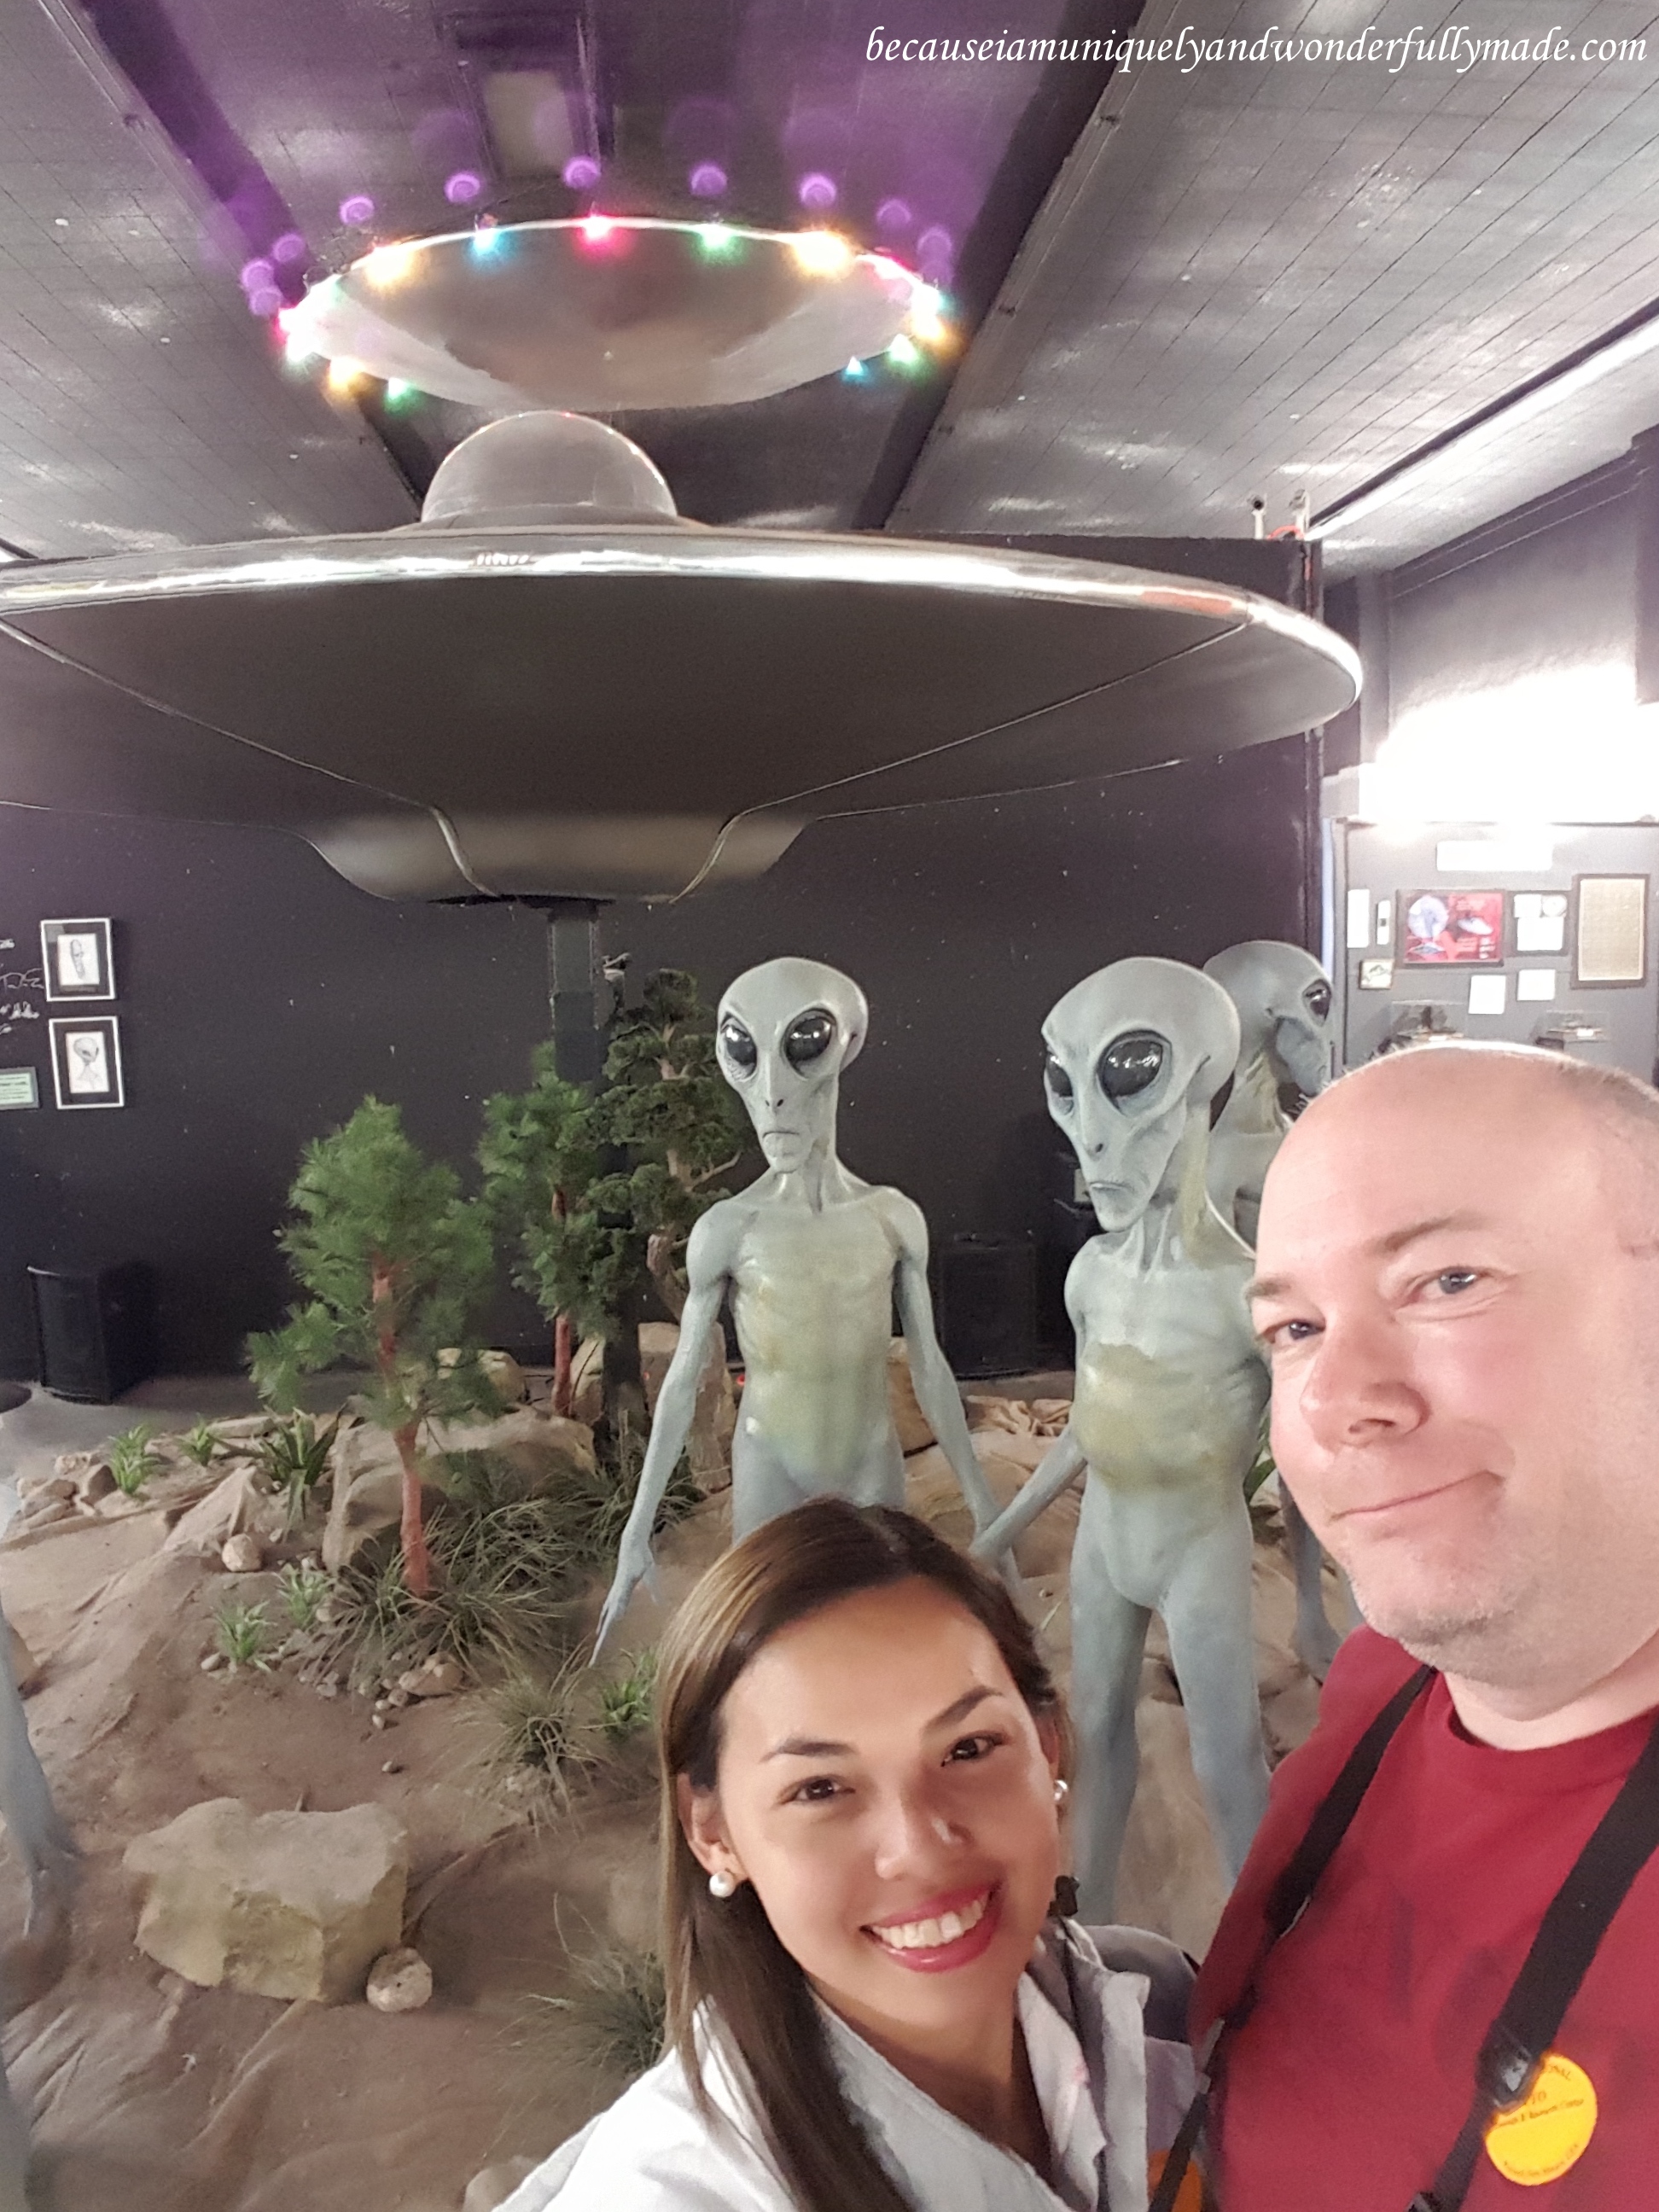 The mechanical life-size aliens with a spacecraft and an alien sound in their background at International UFO Museum and Research Center in Roswell, New Mexico. They actually move!